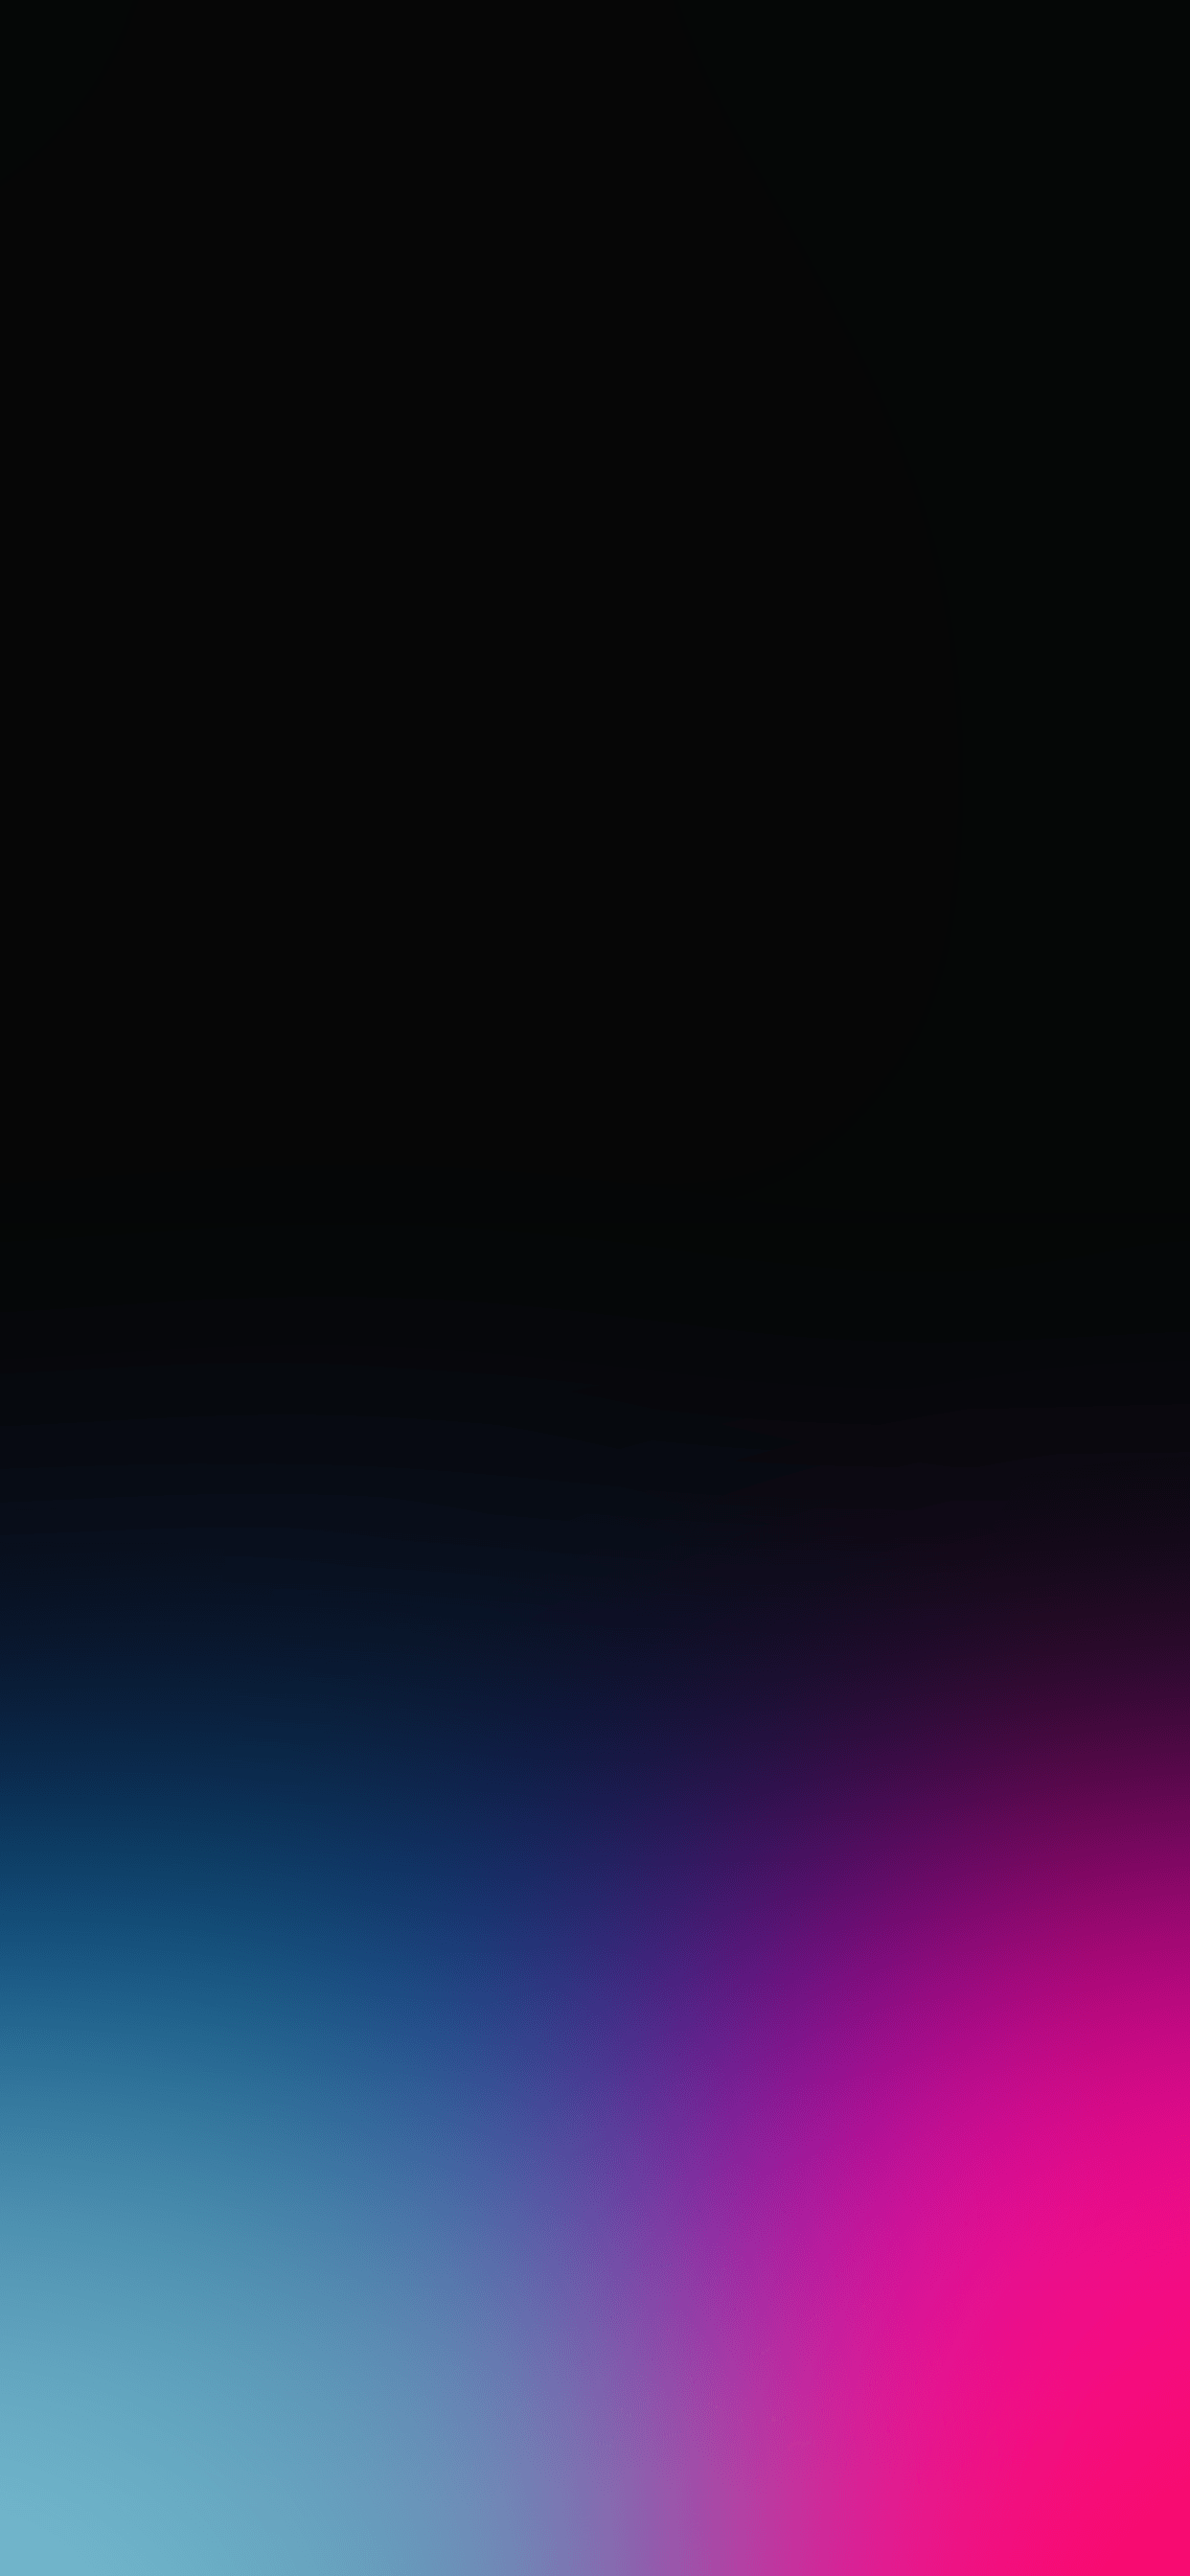 True black with colorful gradients wallpapers